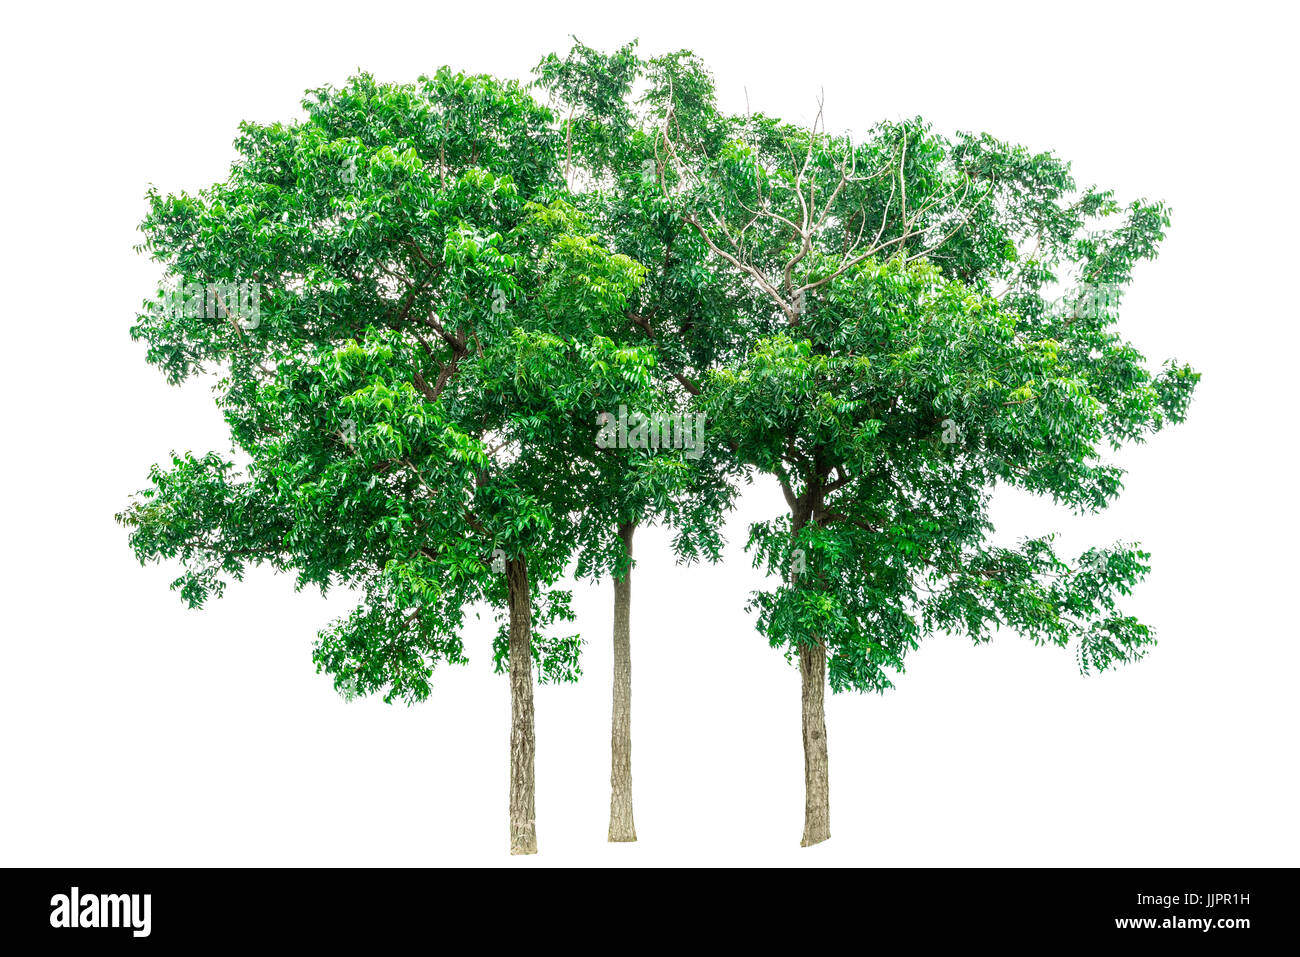 Green tree isolated on white background. Stock Photo